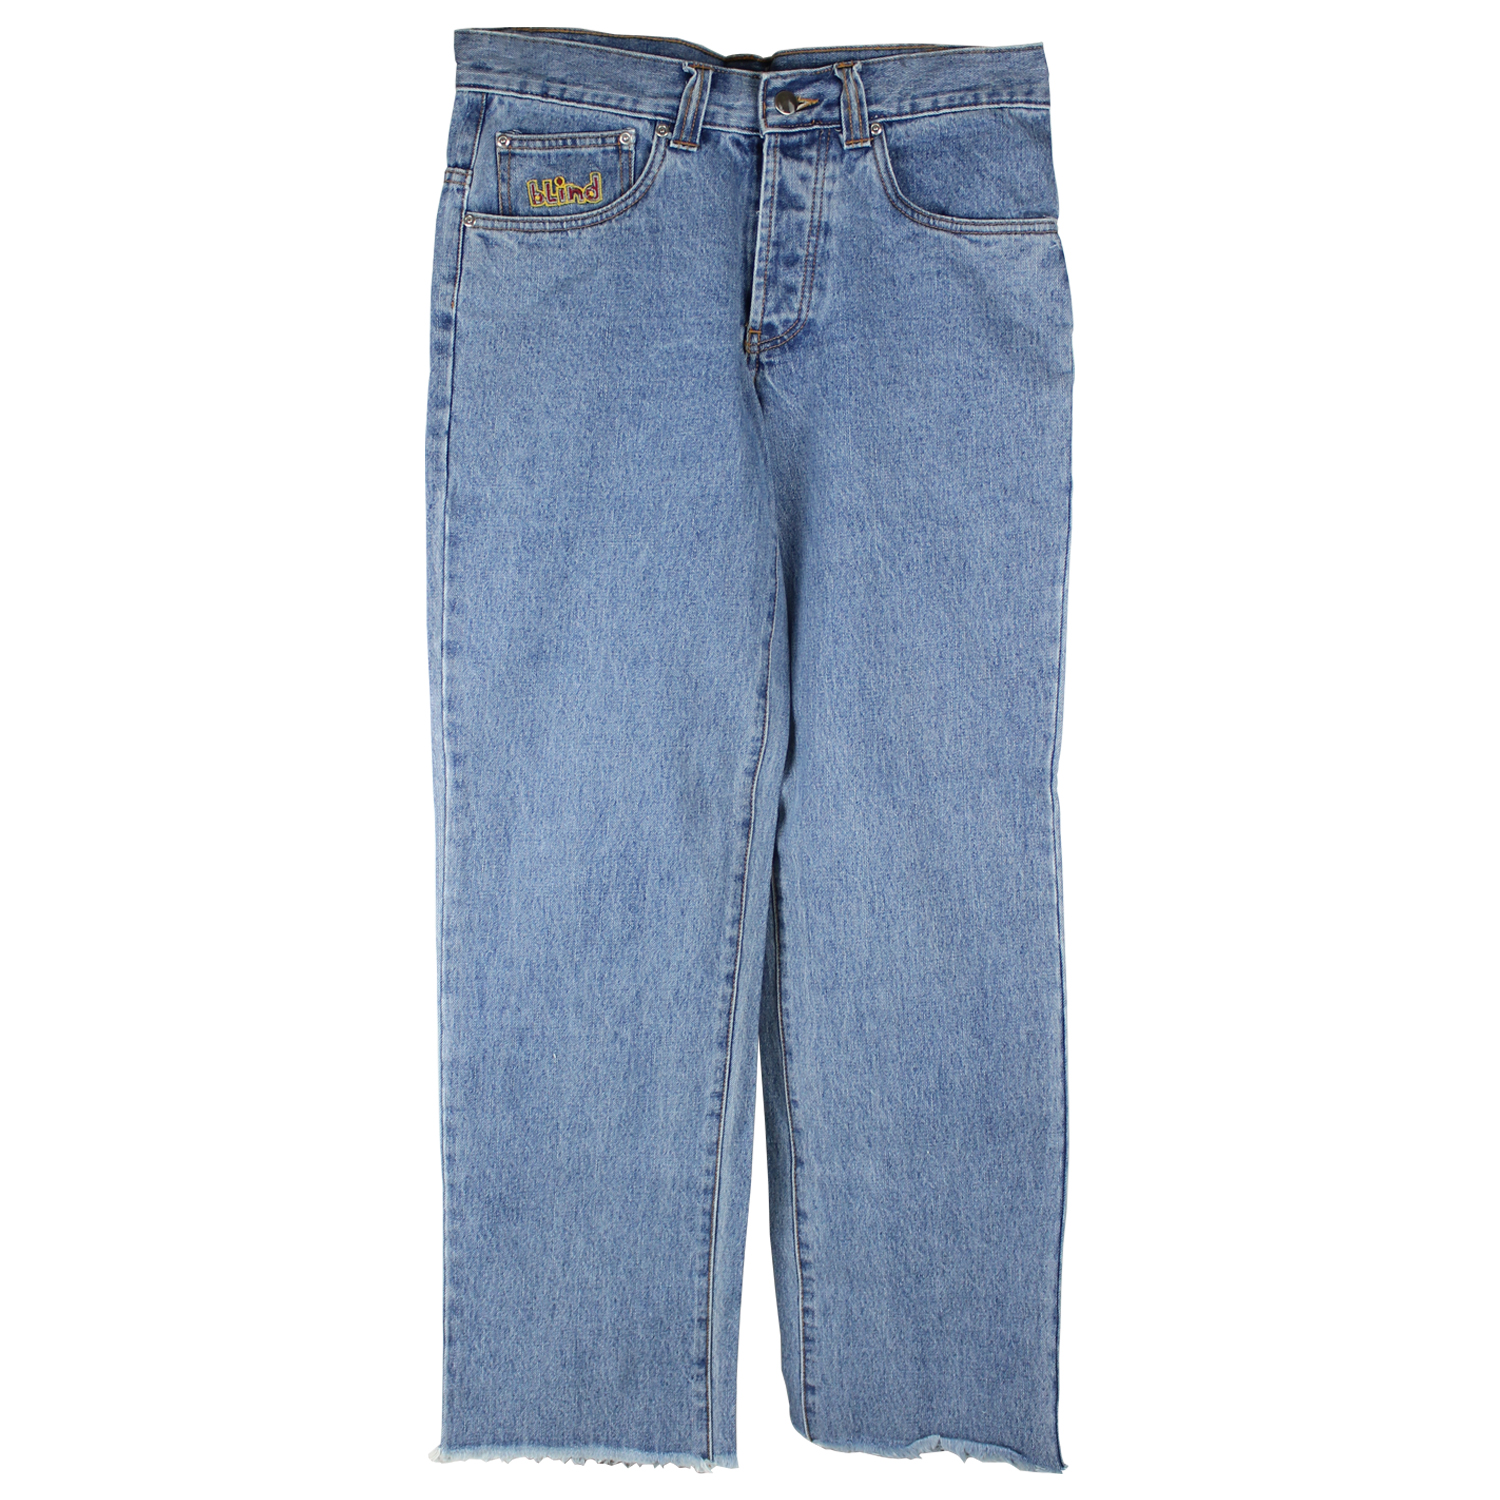 stone washed jeans 90s